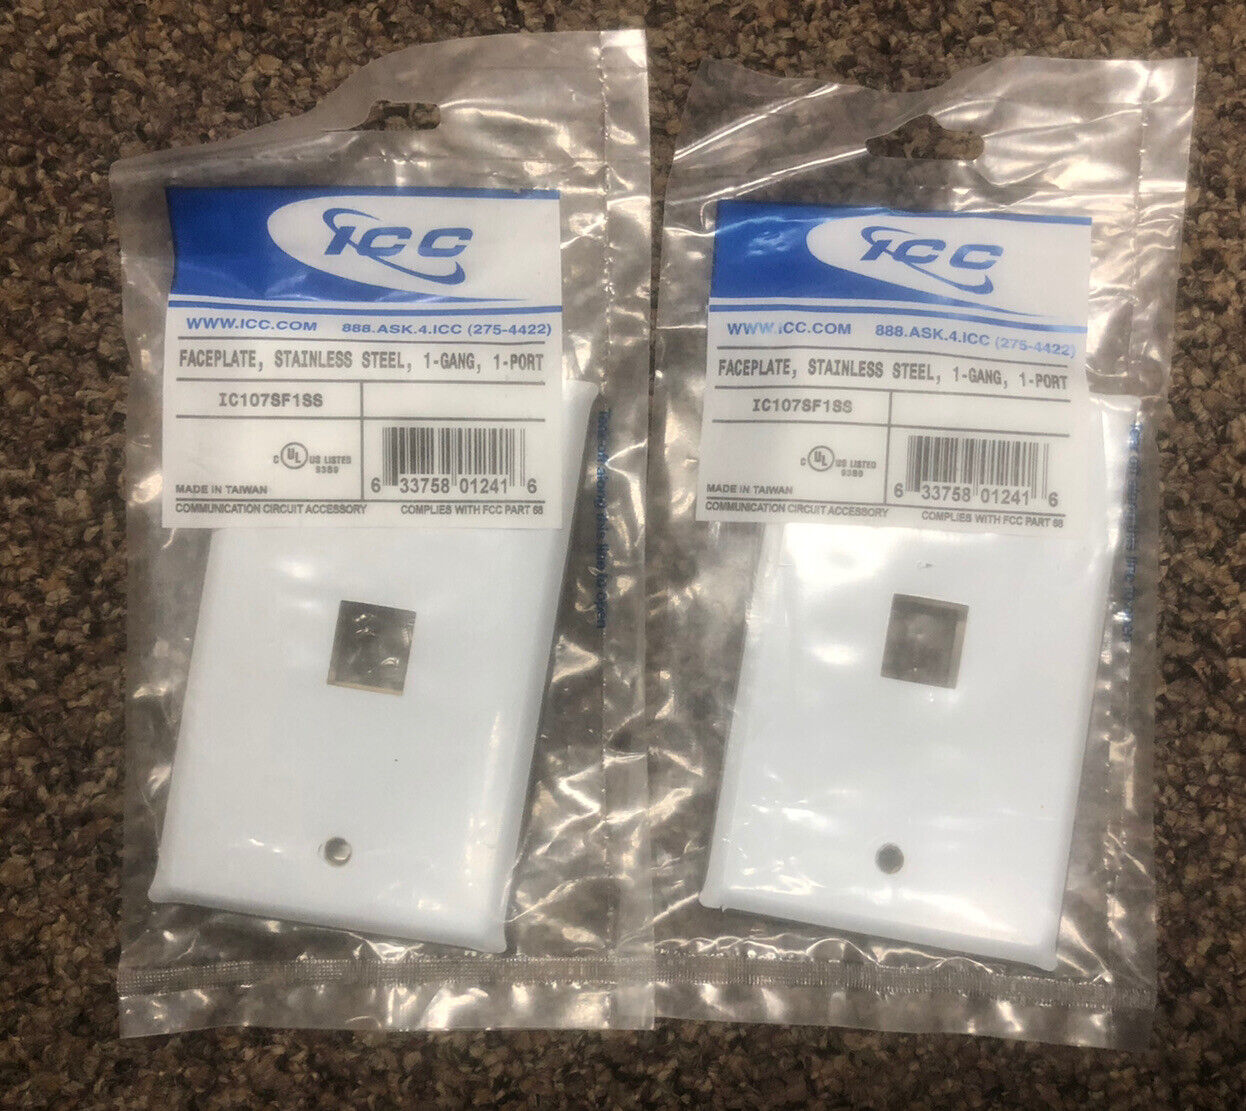 LOT  of 2 NEW ICC IC107SF1SS Stainless Steel 1 Port Face Plate